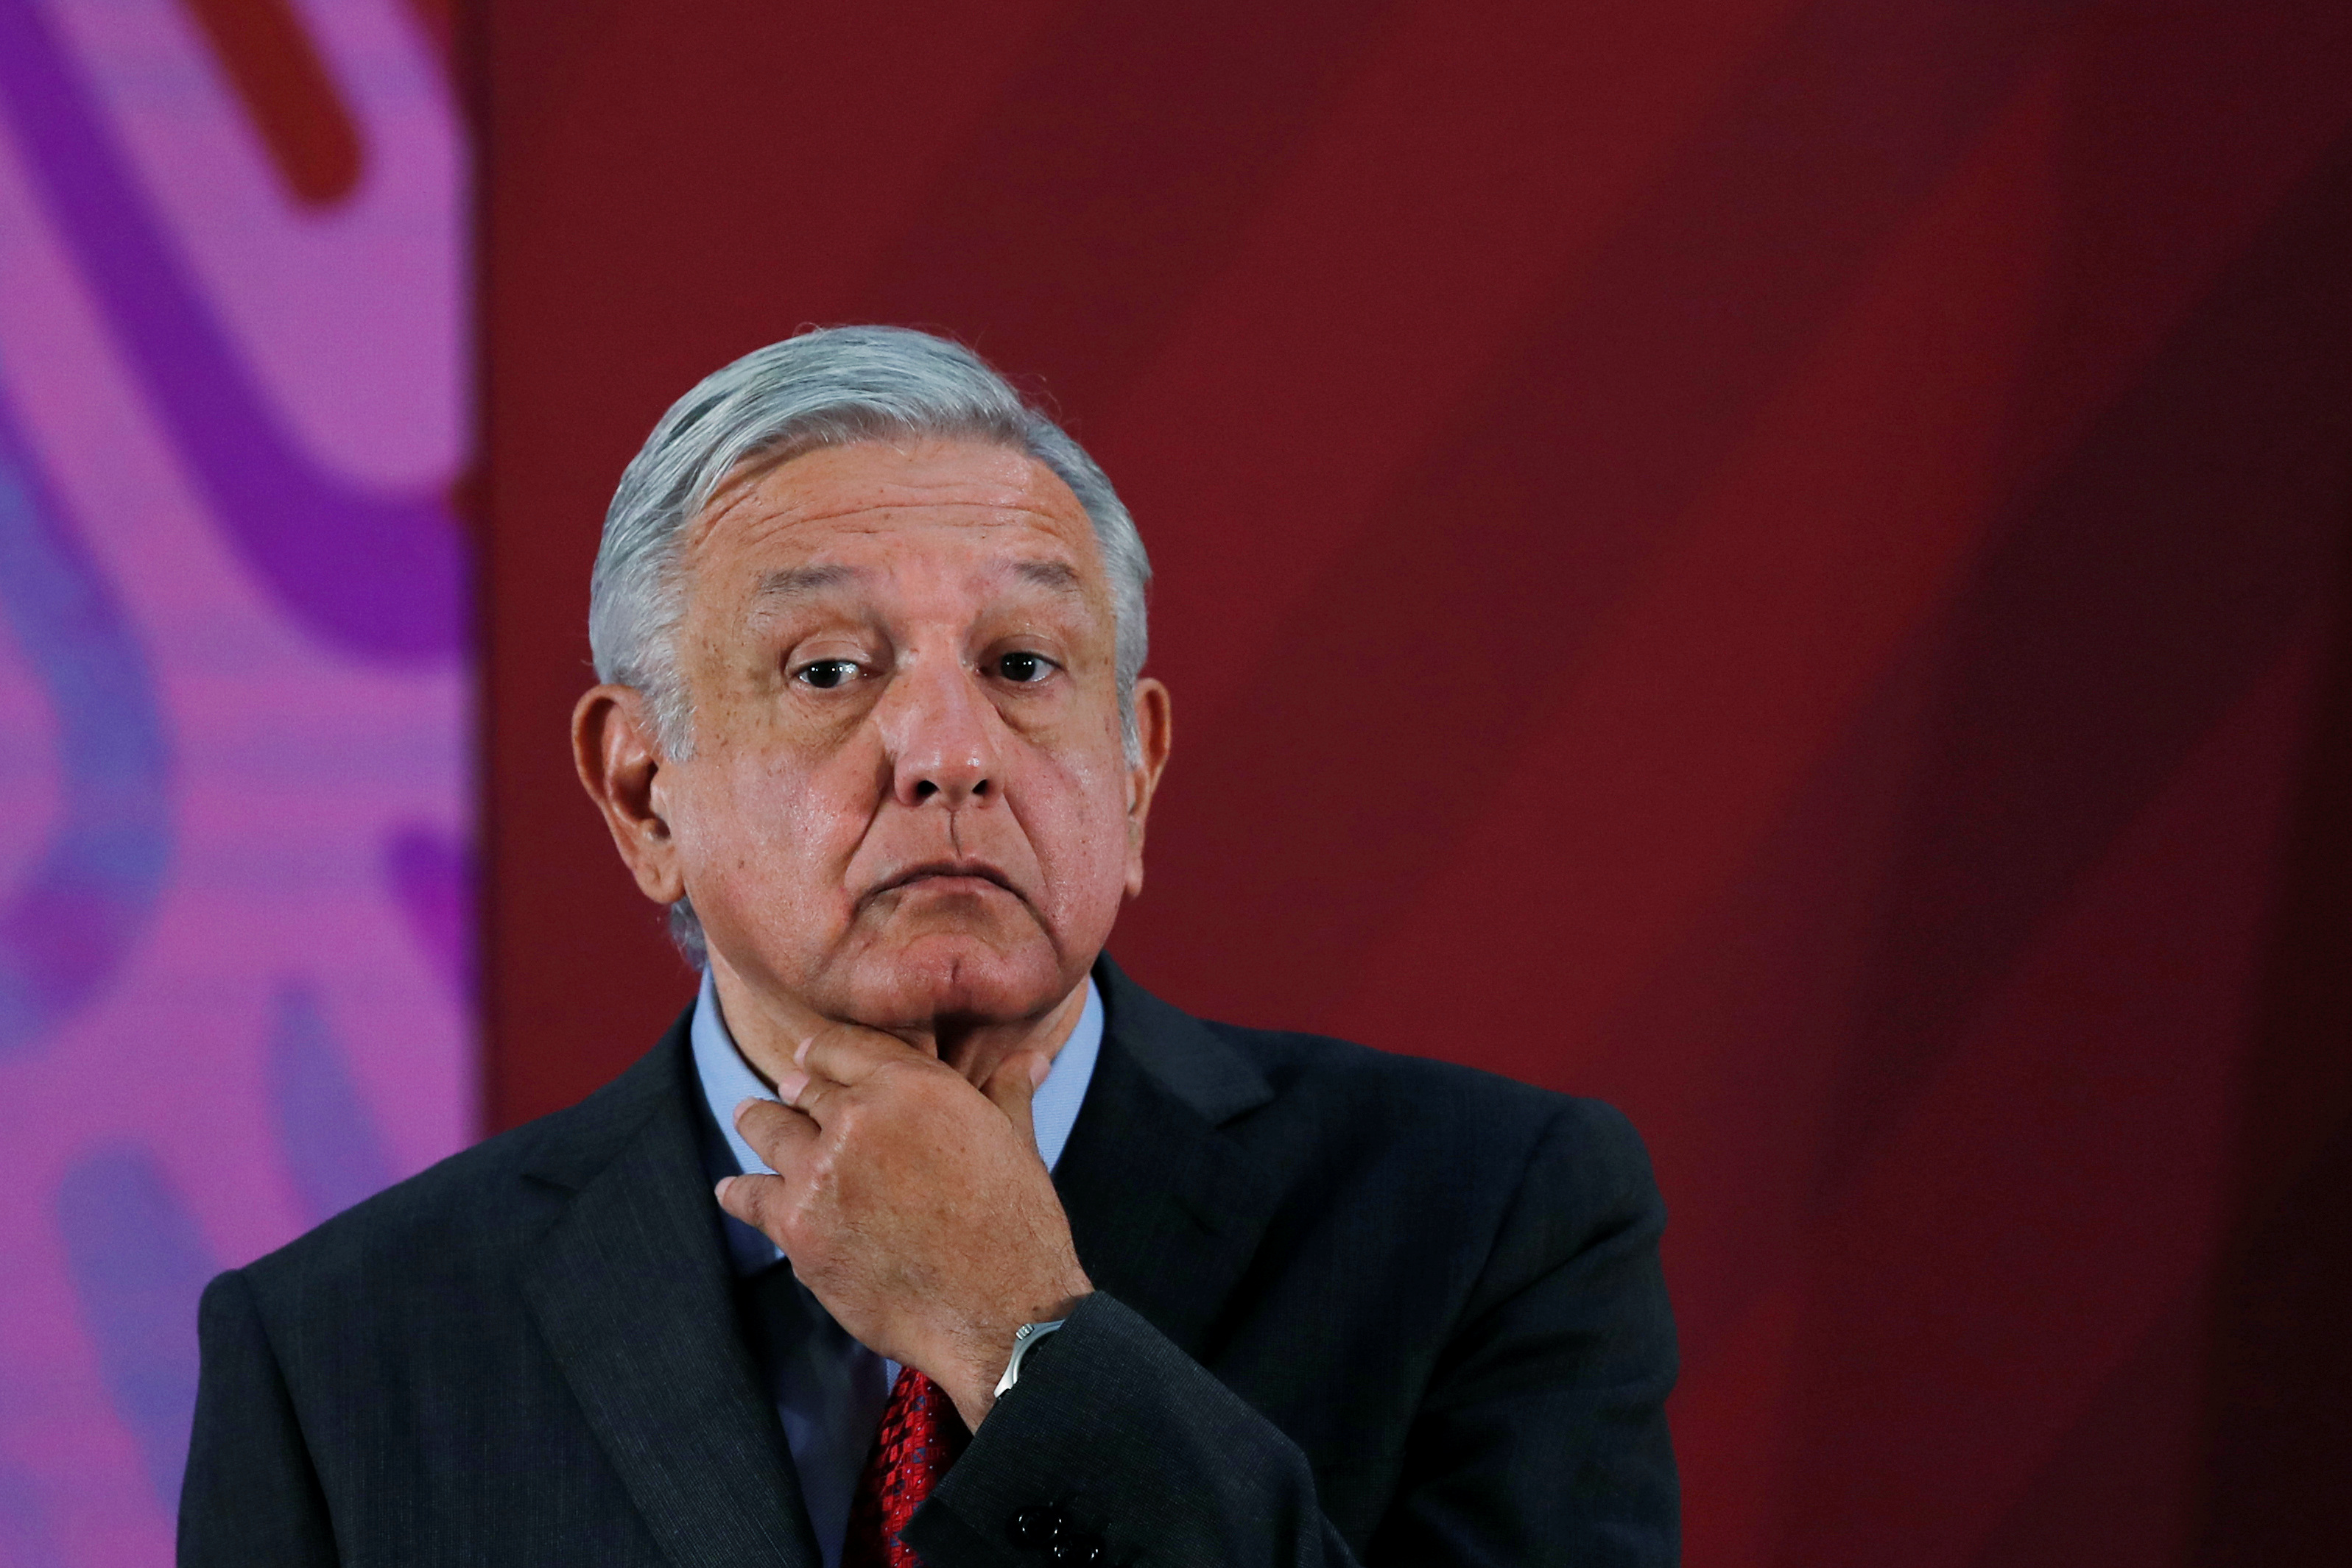 Mexico's President Andres Manuel Lopez Obrador gestures during the daily news conference at National Palace in Mexico City, Mexico November 12, 2019. REUTERS/Carlos Jasso